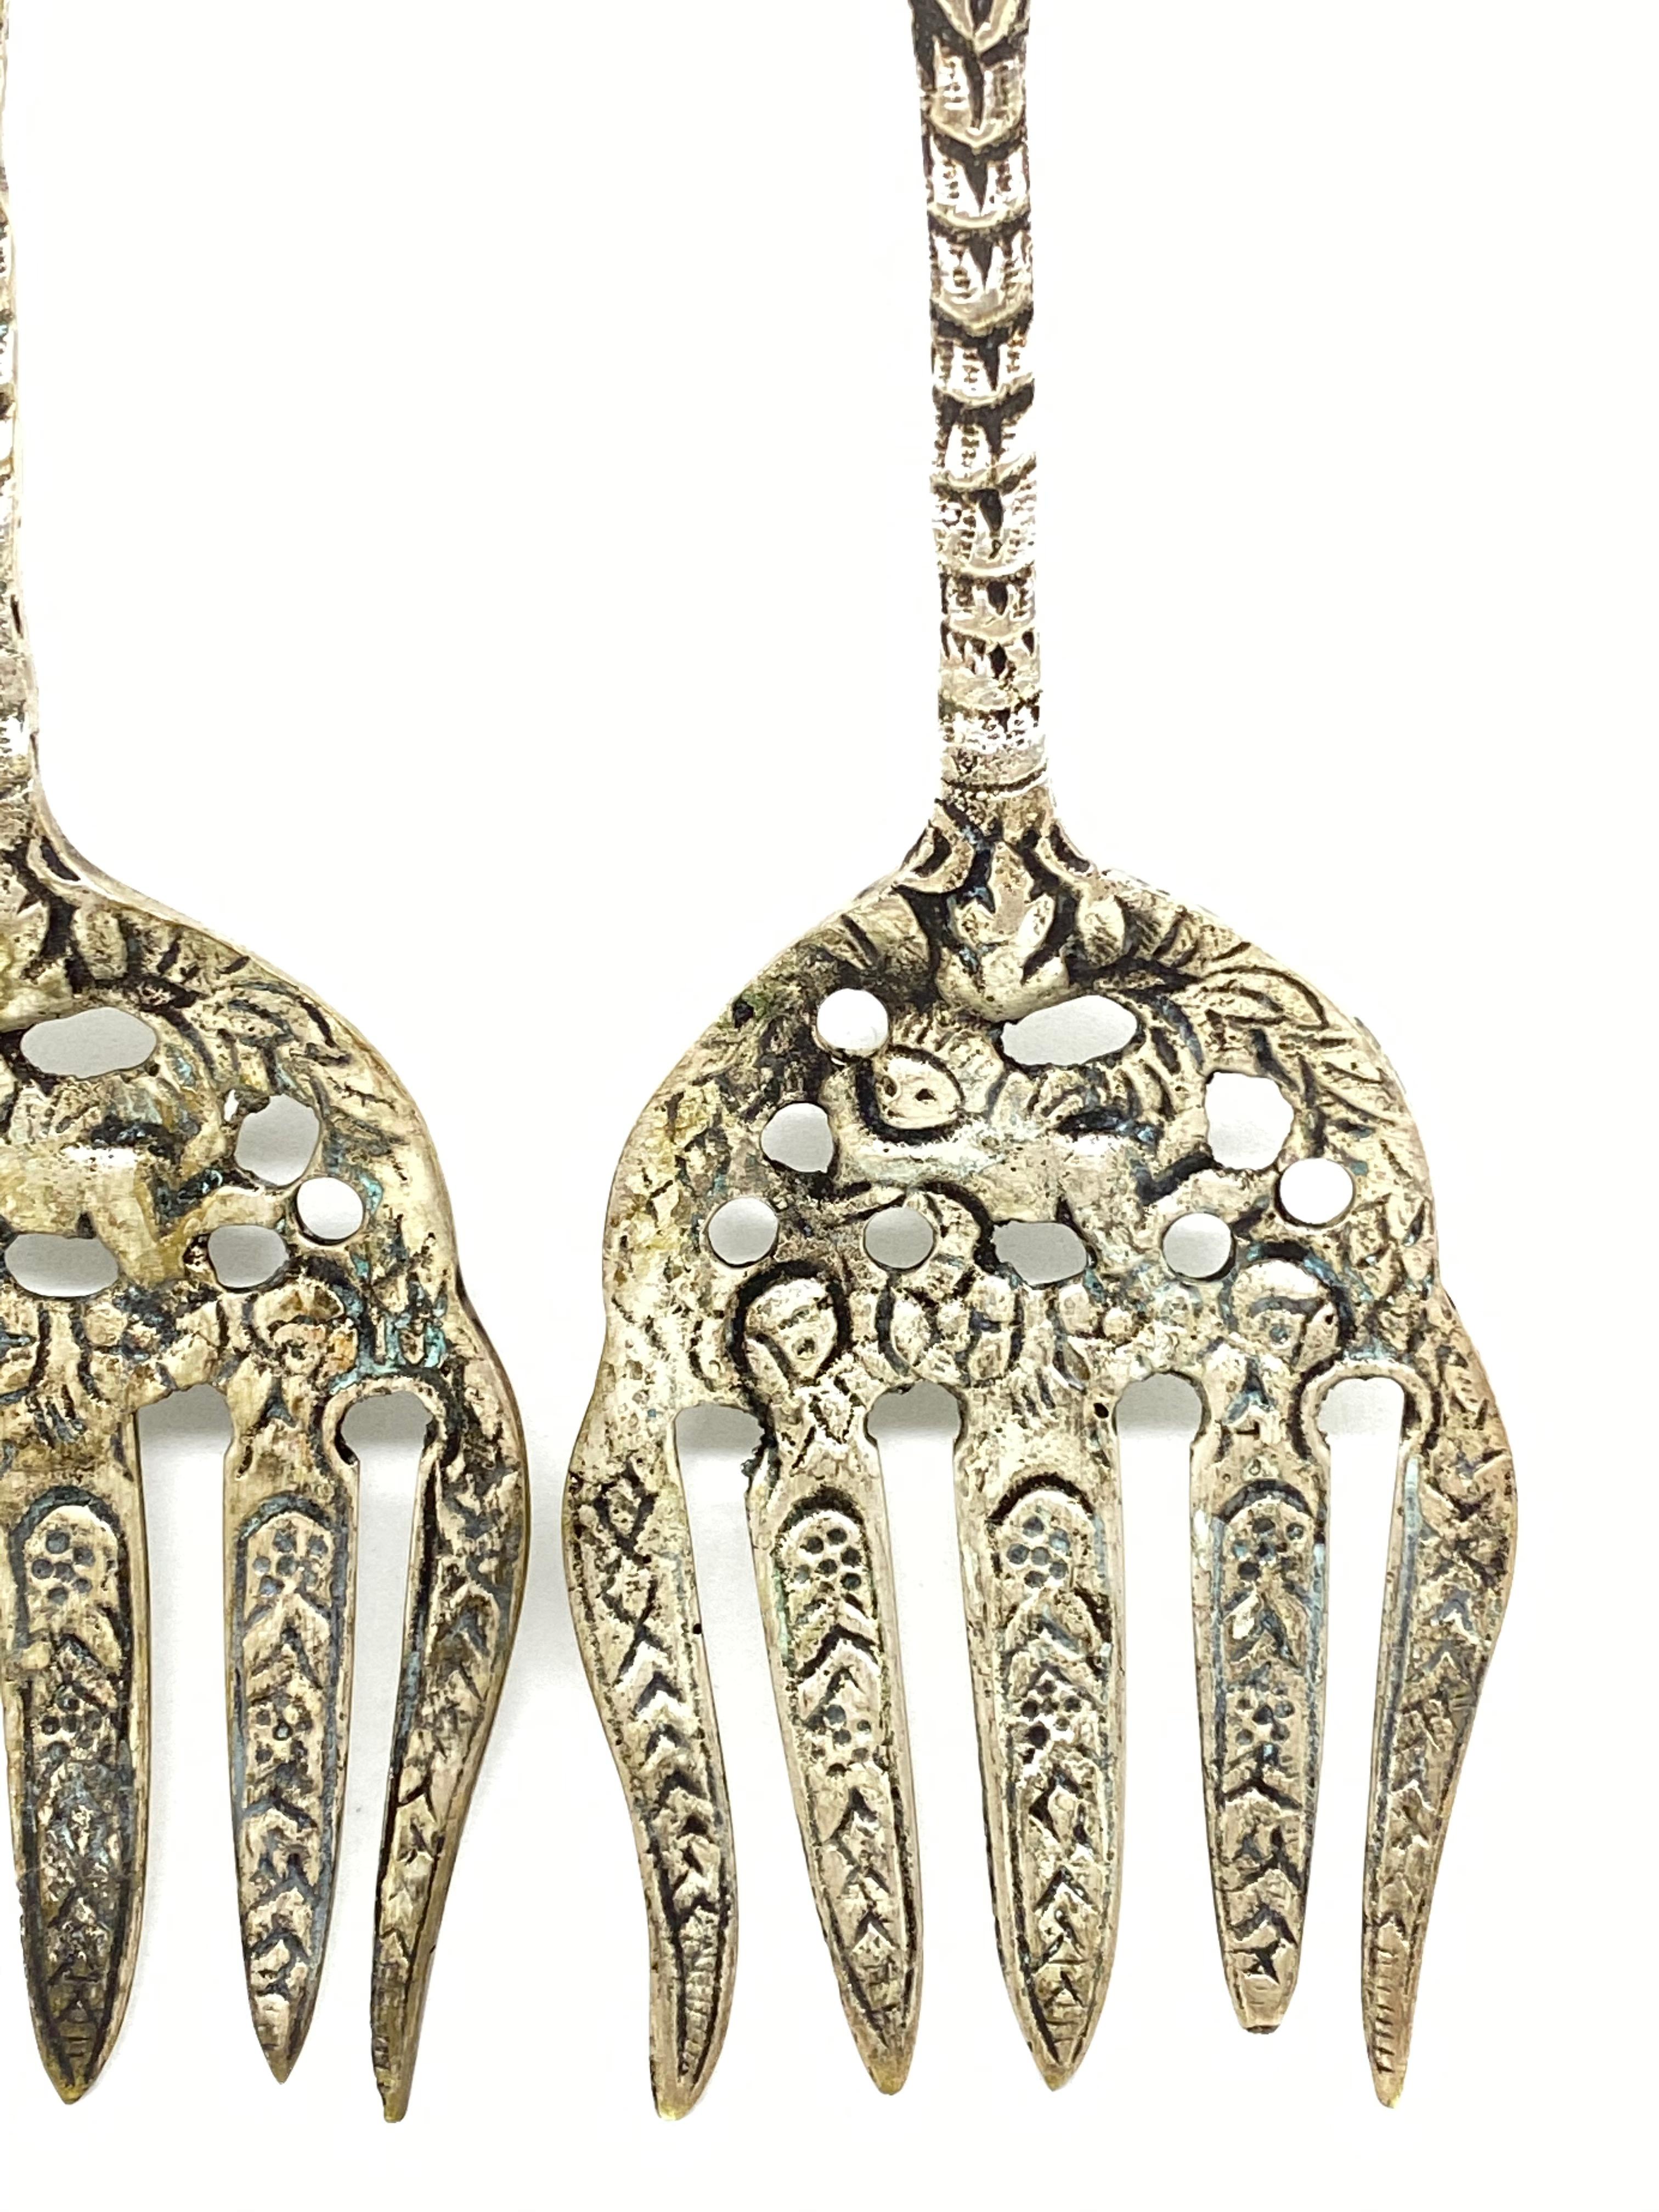 A pair of beautiful Art Nouveau 'Angel' serving forks for salad, fish or meat. These serving pieces are in a rare and antique 'Angel' design. Made of silver plated metal, it will make a nice addition to any table.
  